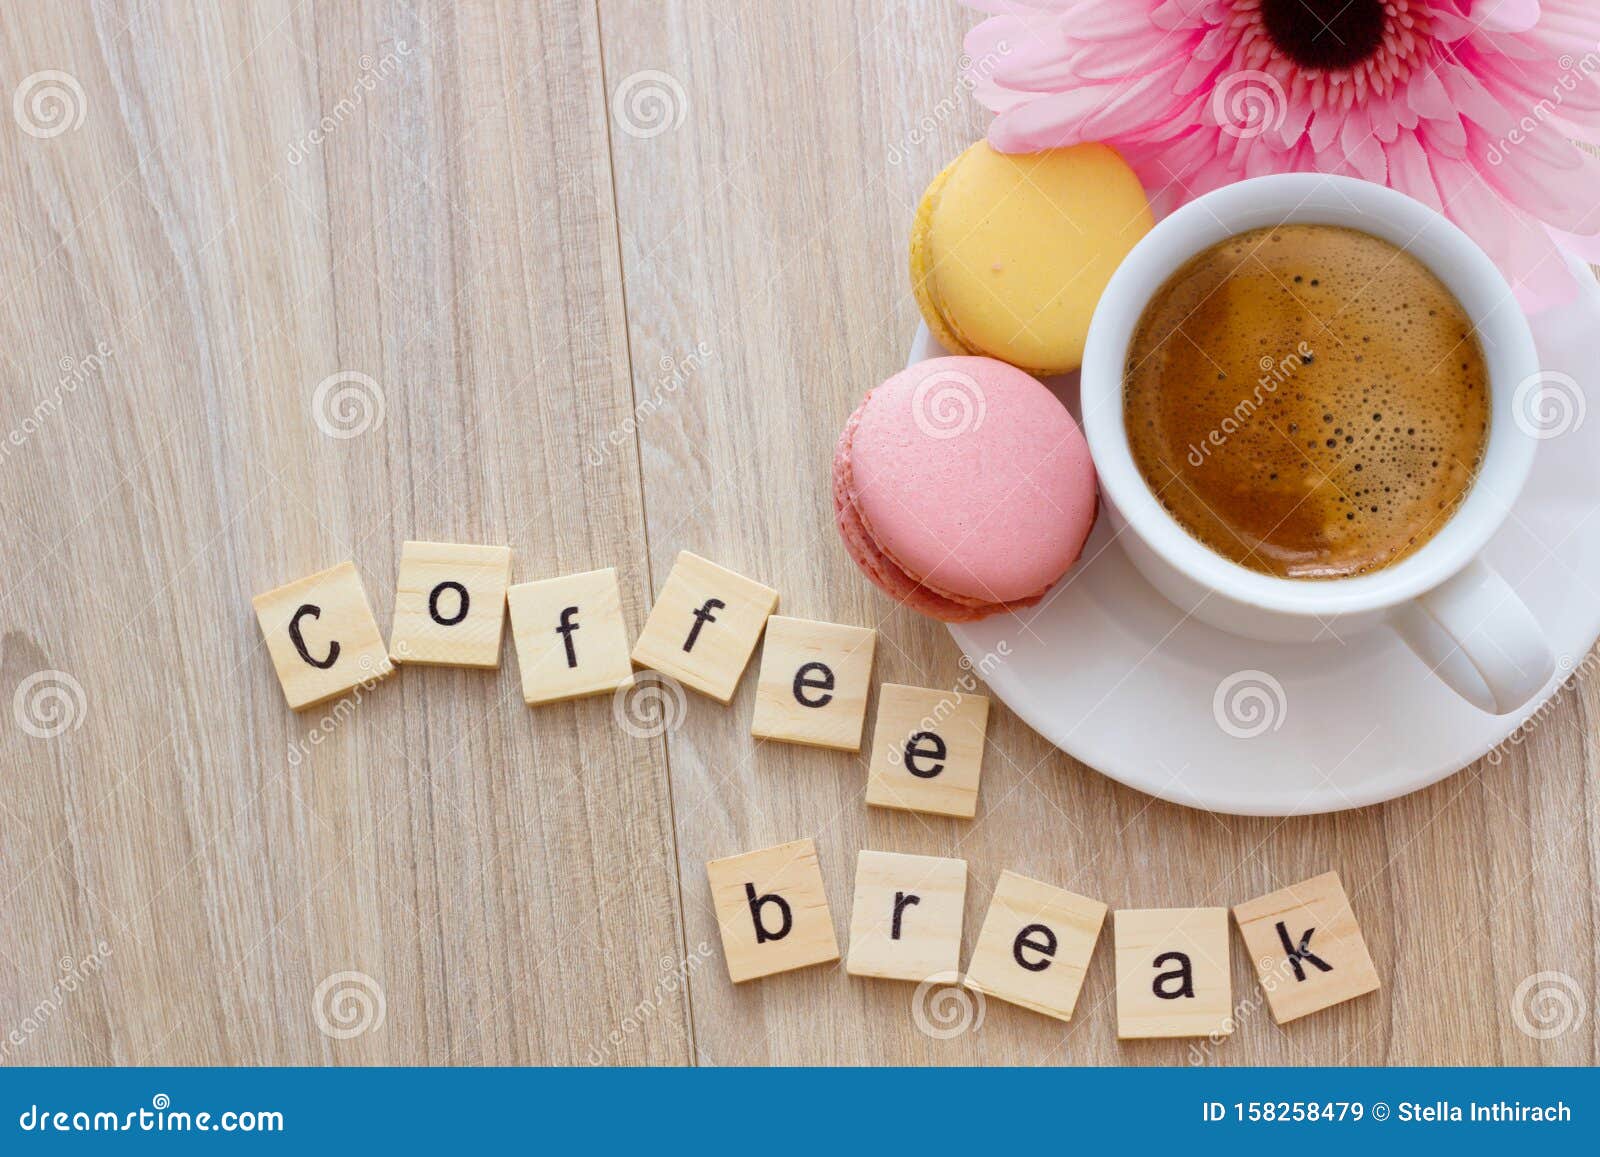 Good Afternoon Message Coffee Break Concept White Cup Of Frothy